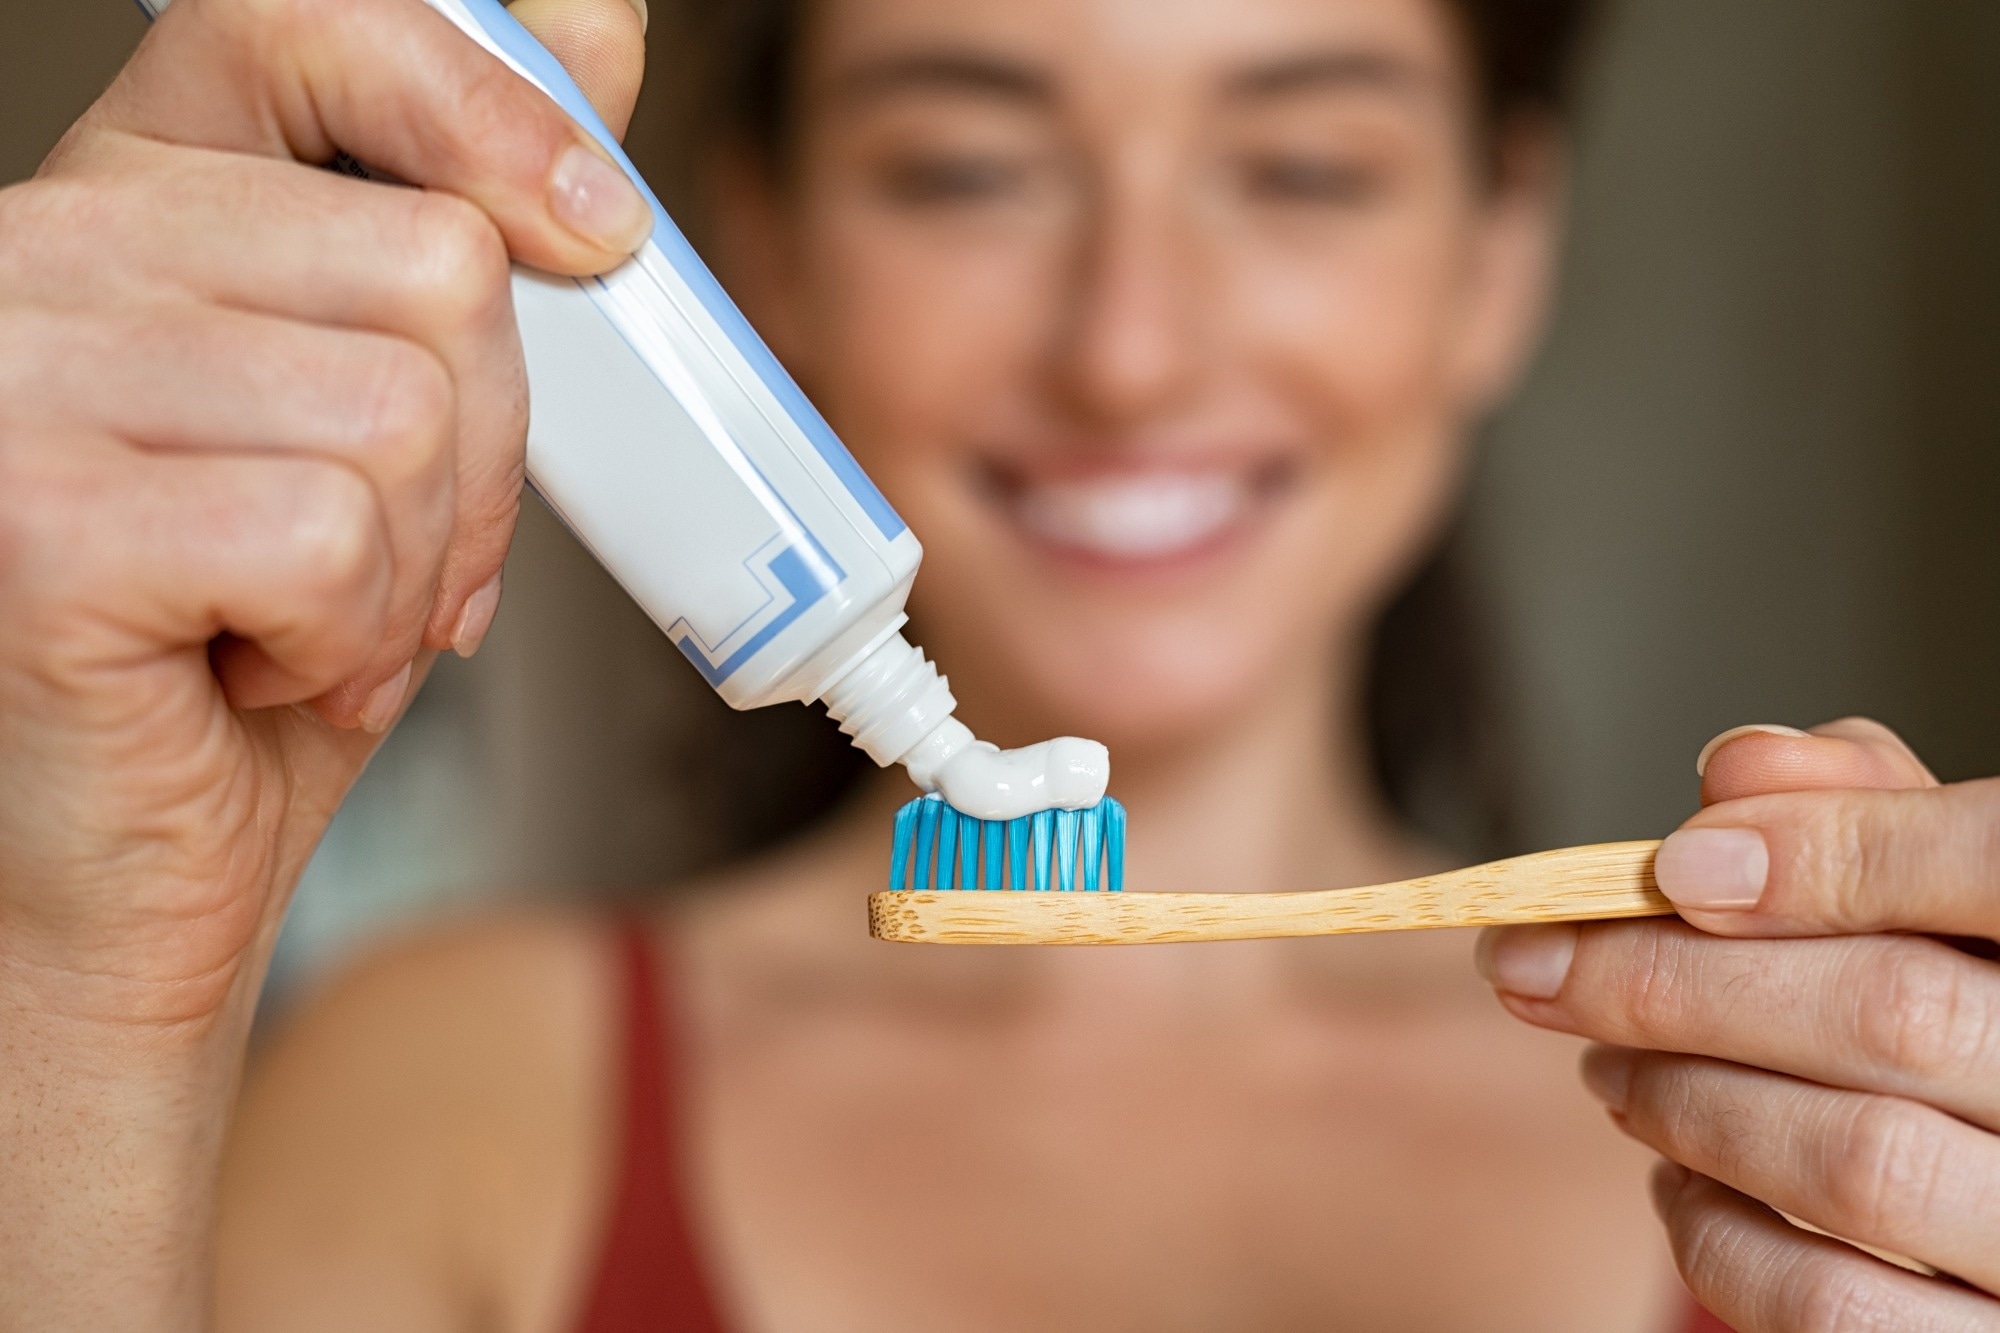 Study: Caries-preventing effect of a hydroxyapatite-toothpaste in adults: a 18-month double-blinded randomized clinical trial. Image Credit: Ground Picture/Shutterstock.com